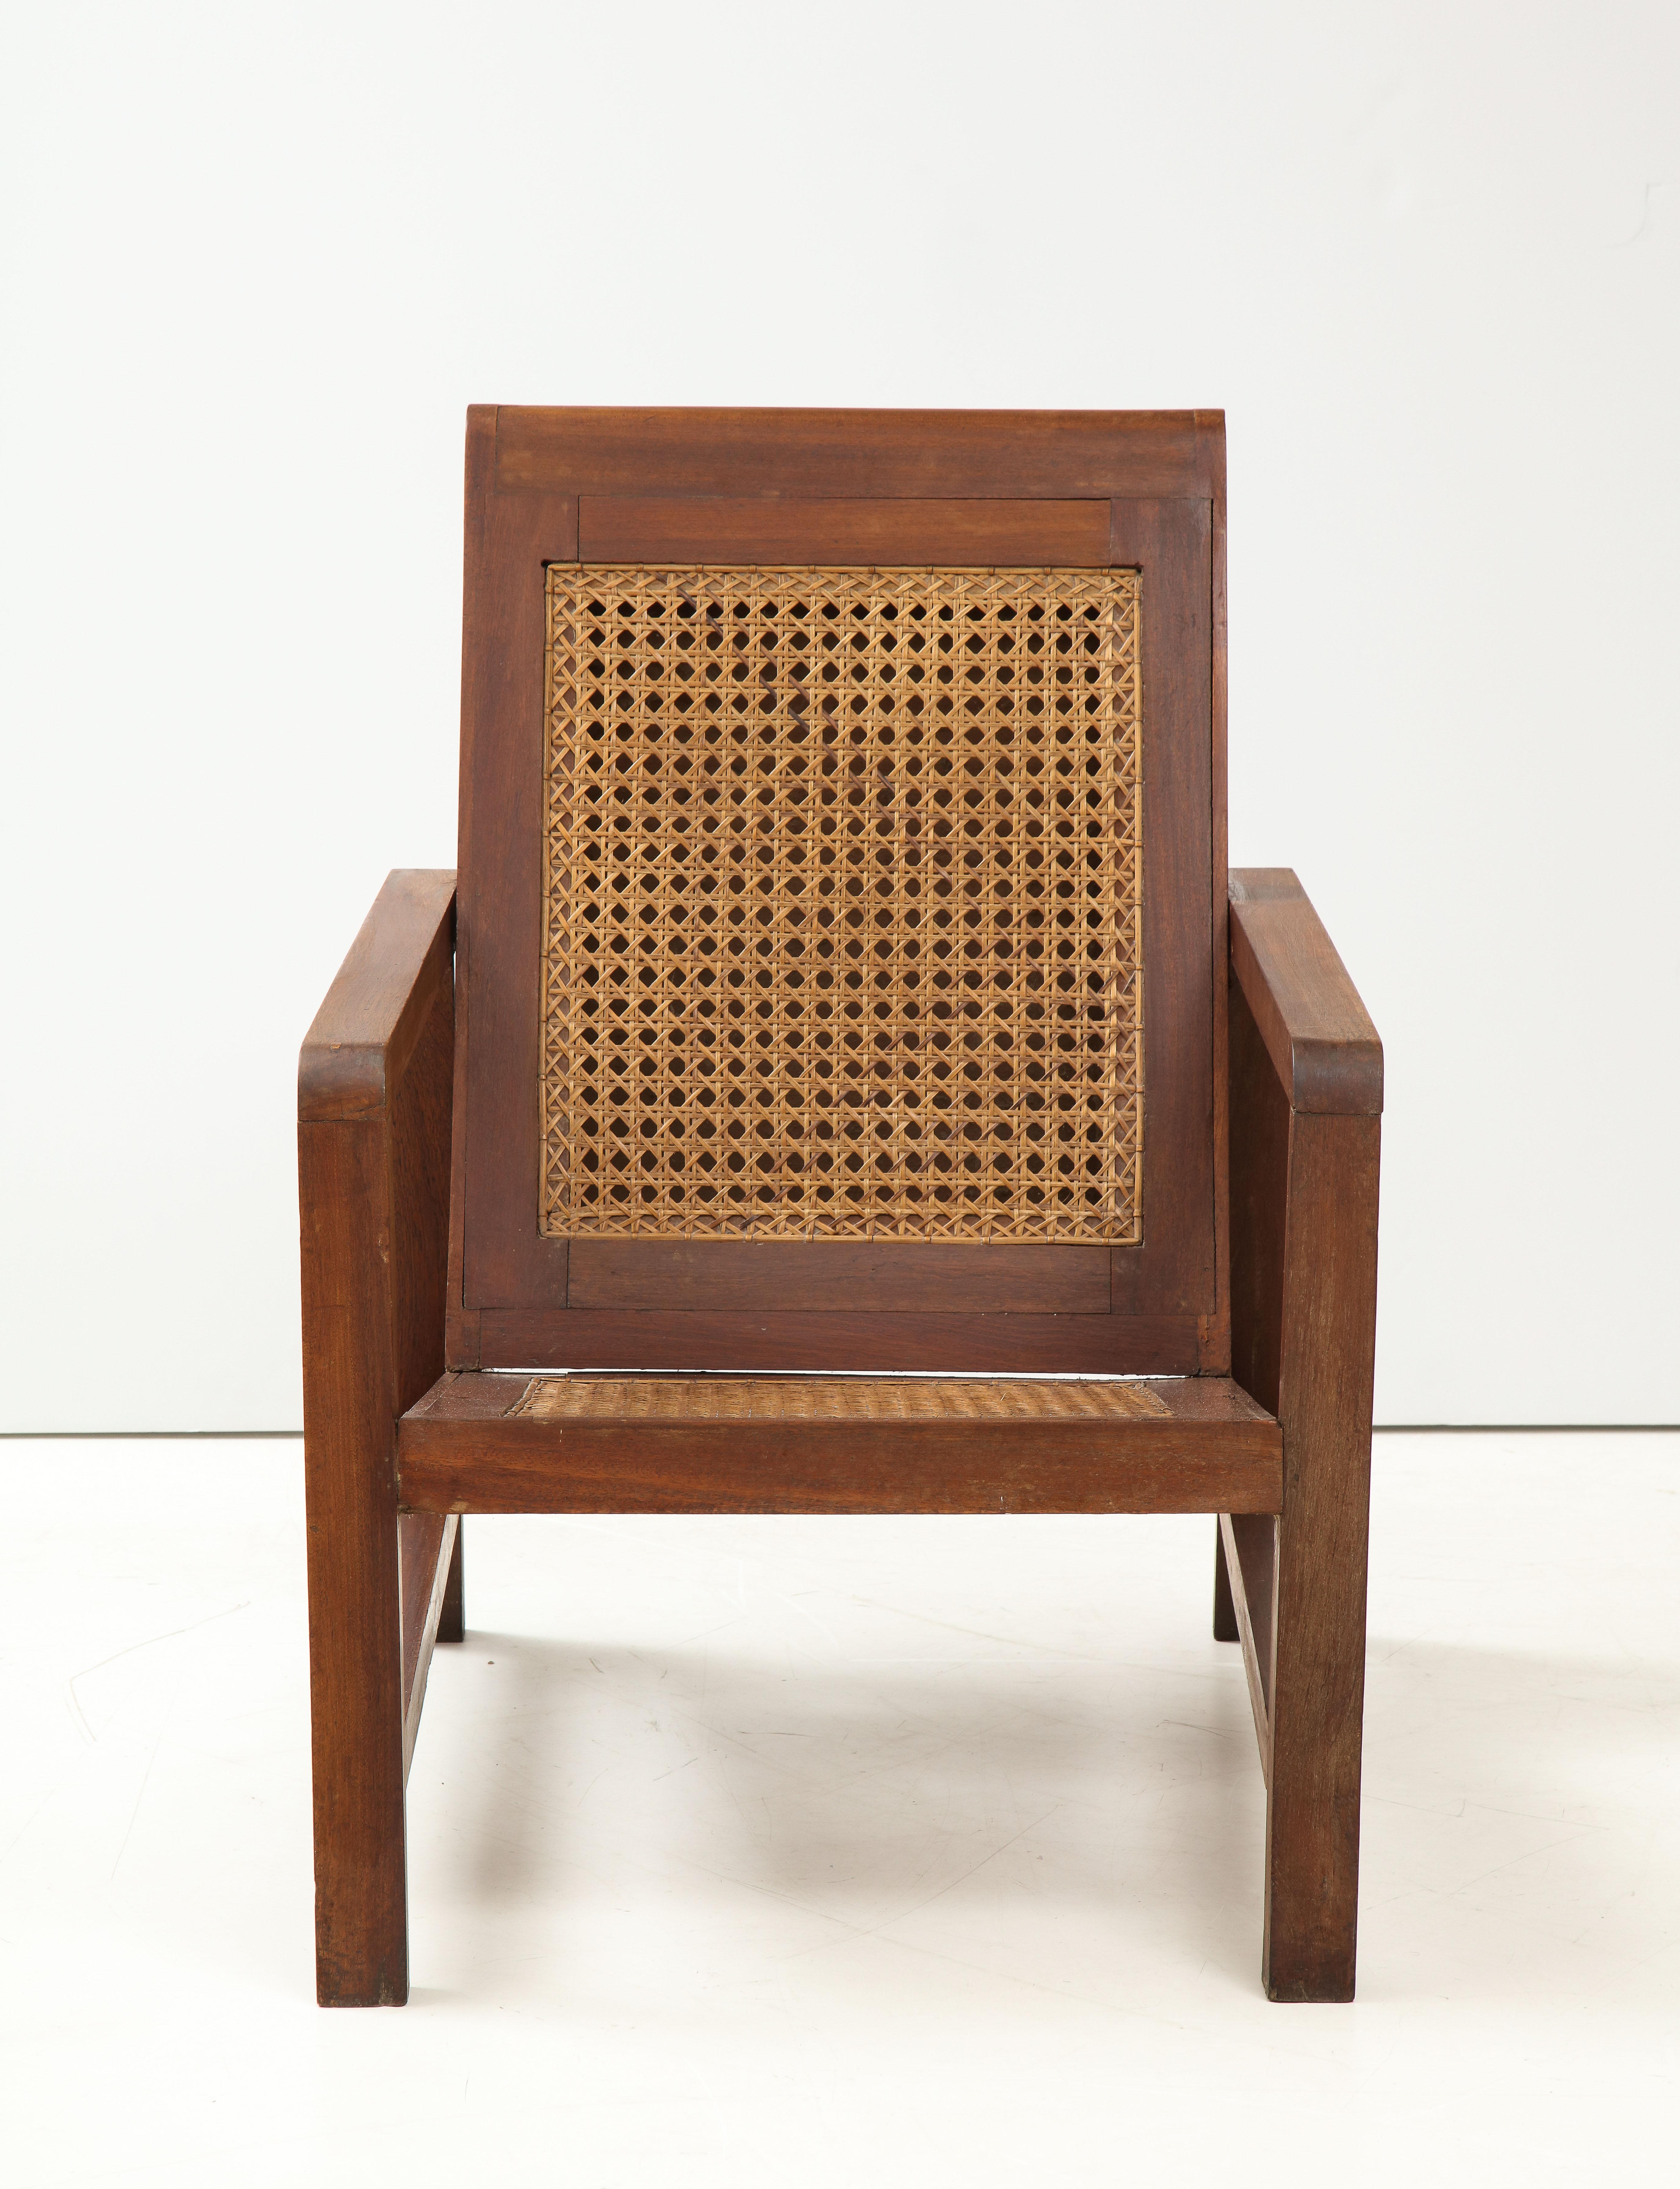 Cane Pair of Modernist Period Pierre Jeanneret Style Chairs, France, c. 1950